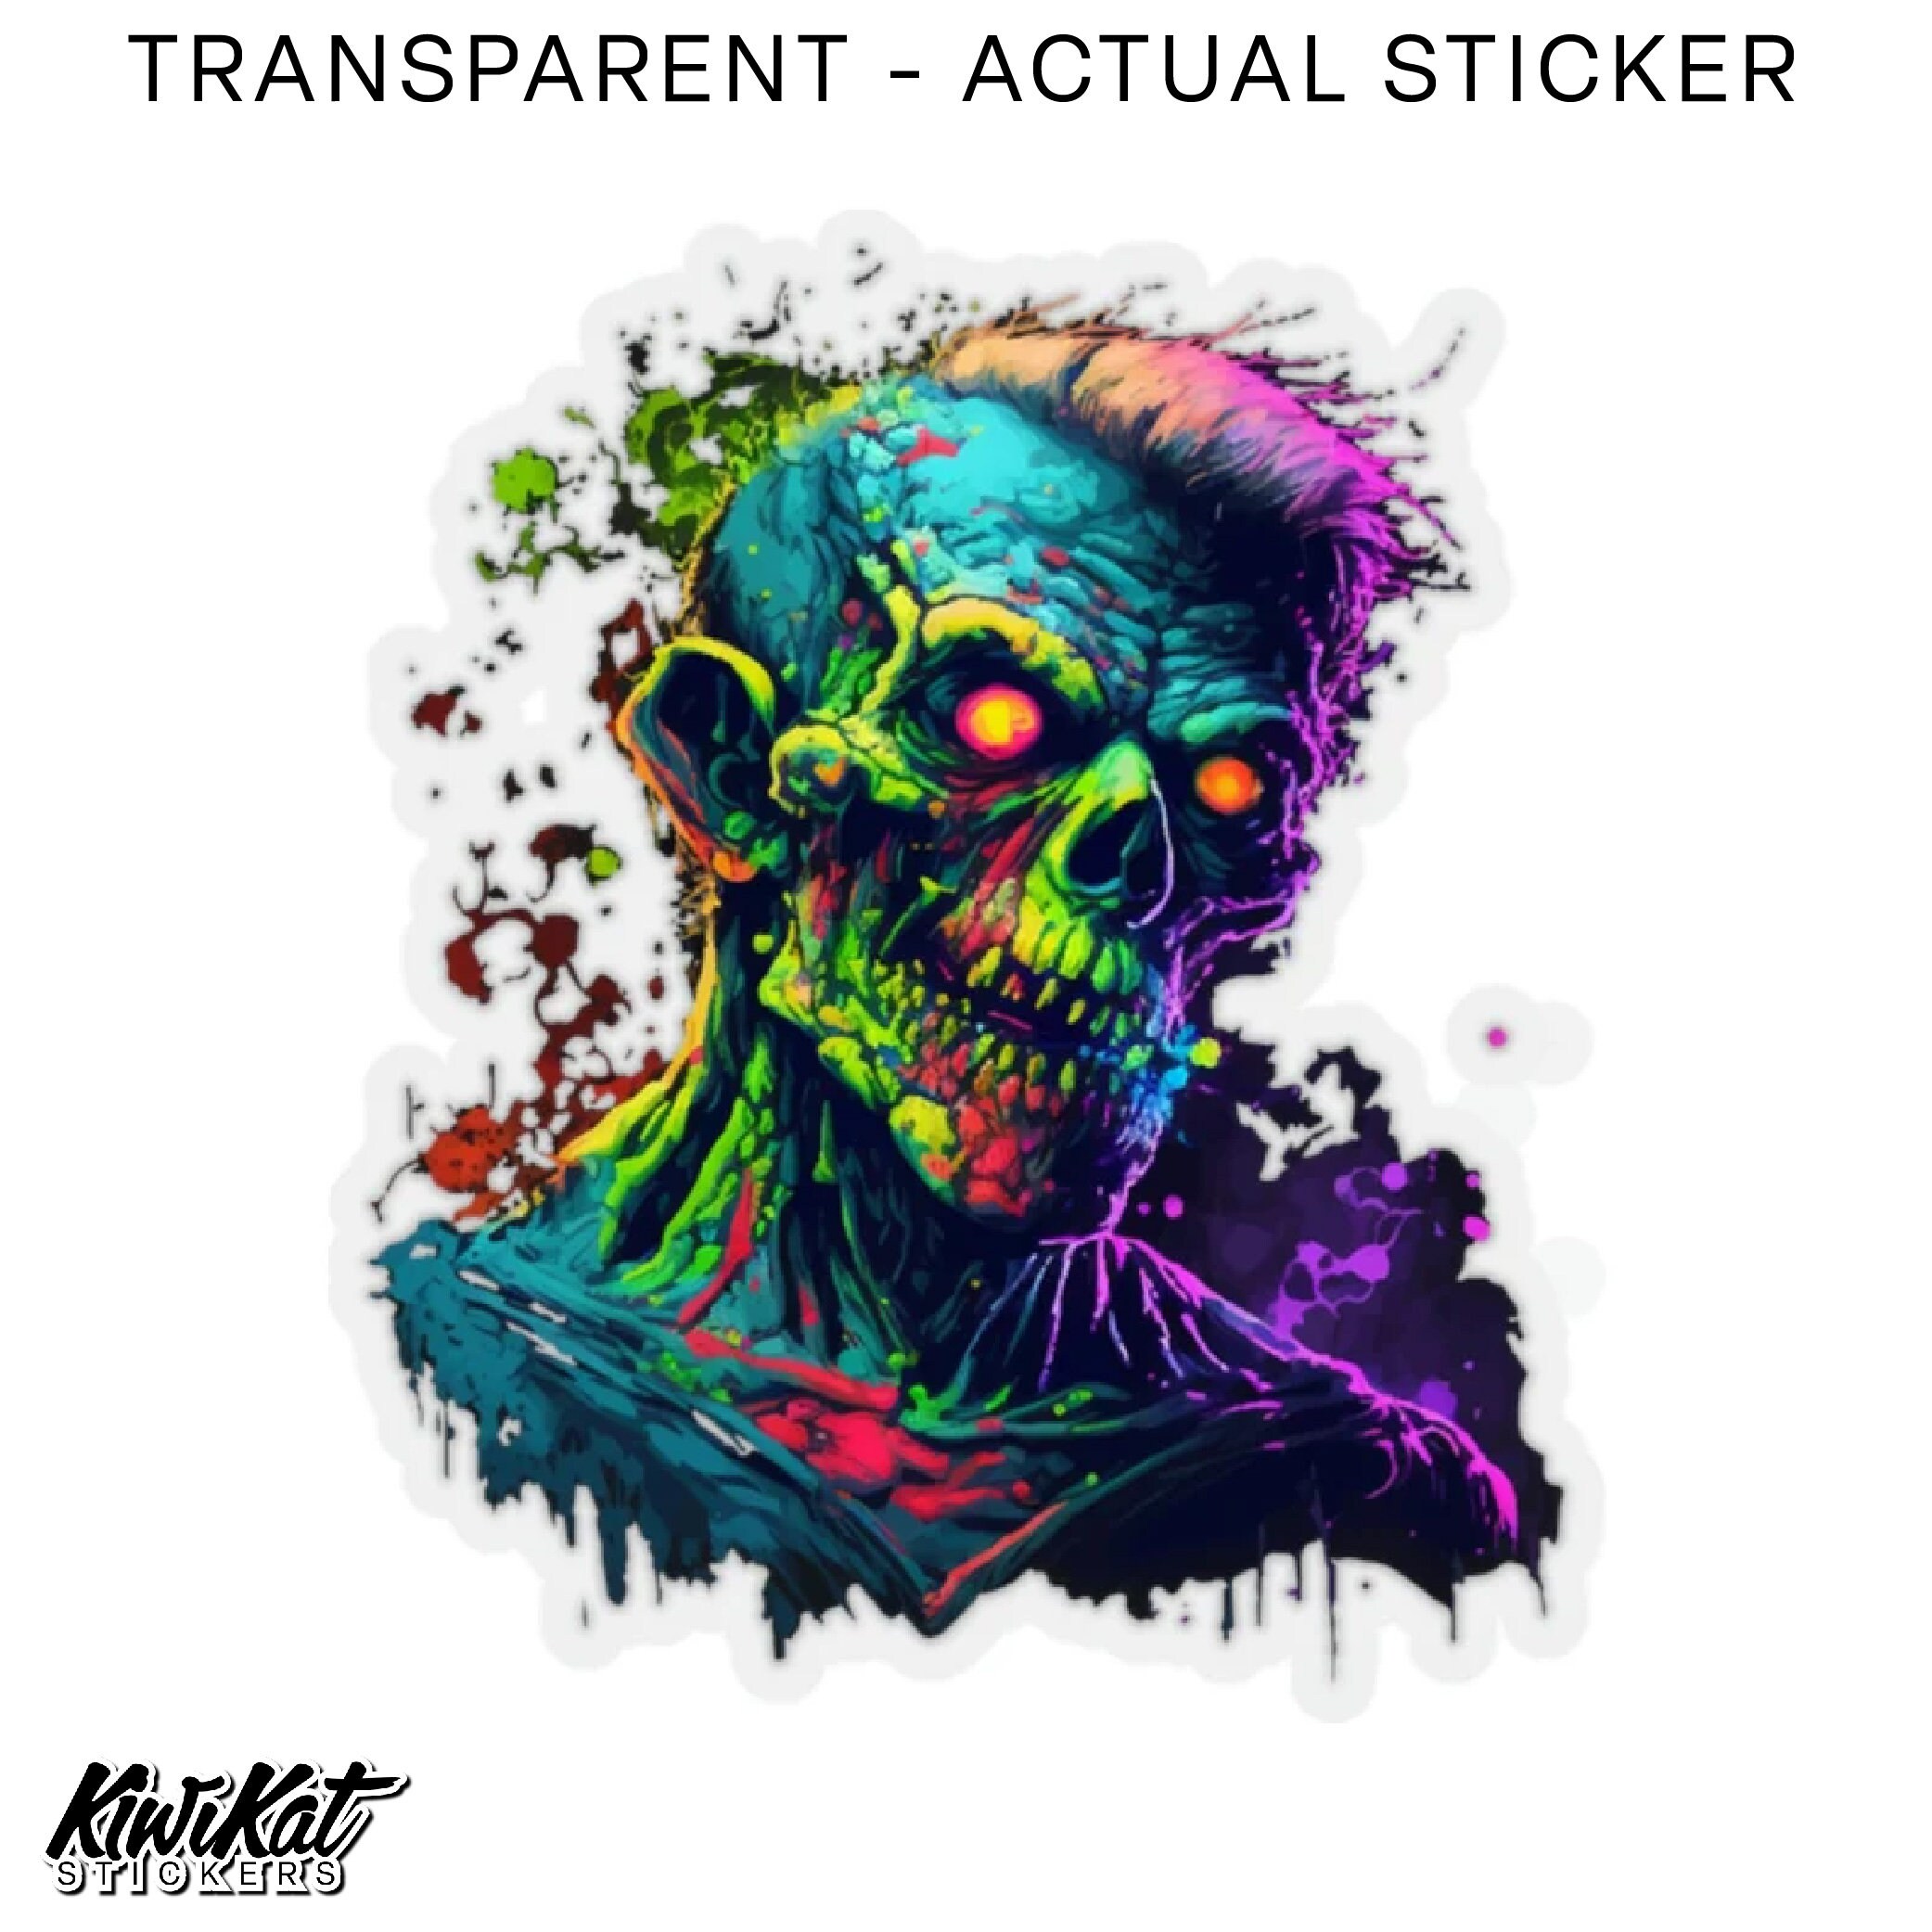 Discover Zombie Spooky Edgy Sticker! Halloween Decor and Laptop Decals or Water Bottles